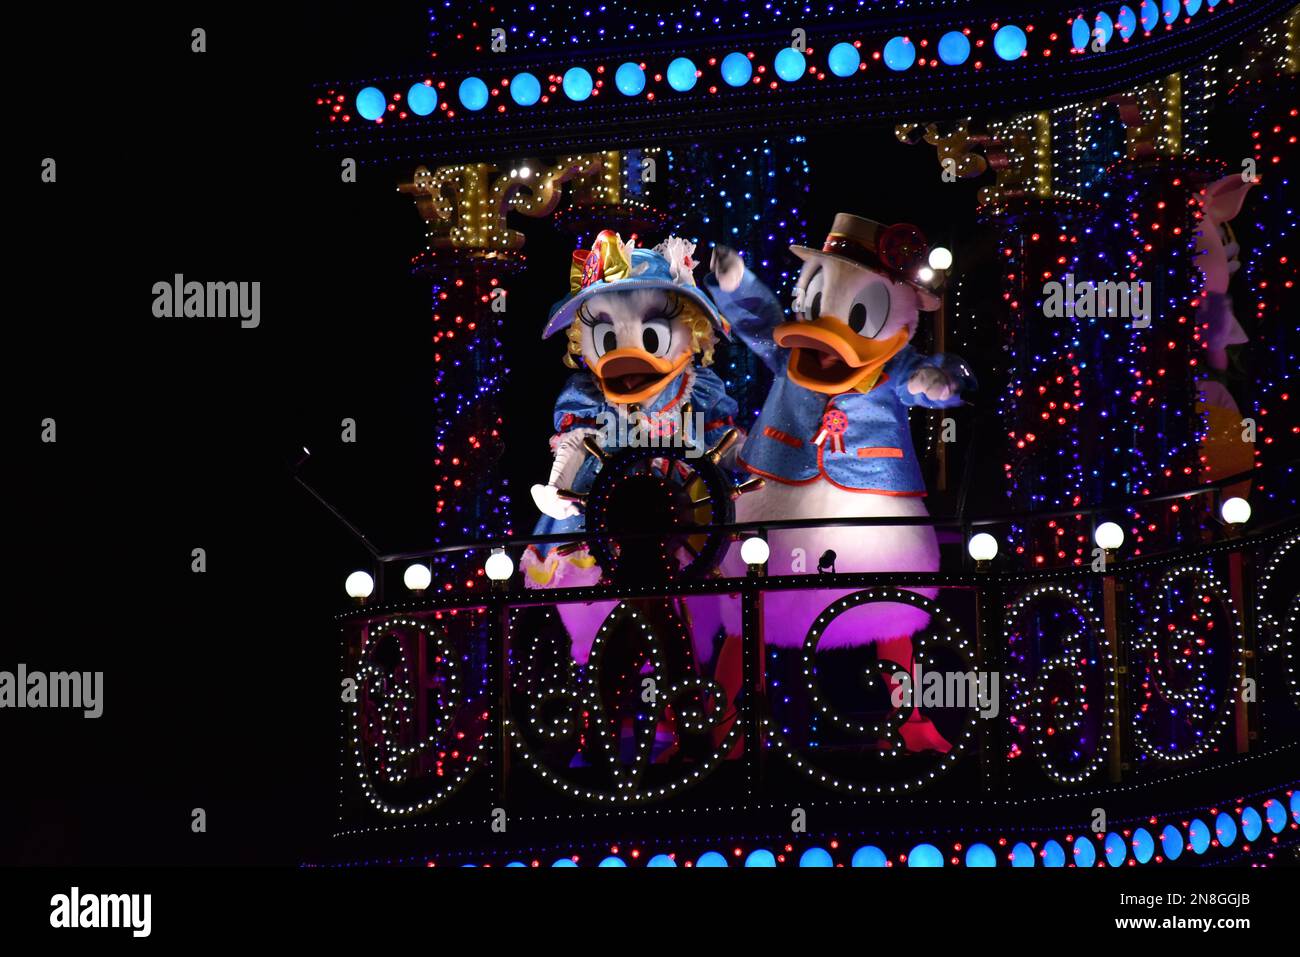 LOUIS VUITTON feat. DISNEY - daisy  Funny cartoon characters, Minnie mouse  images, Mickey mouse wallpaper